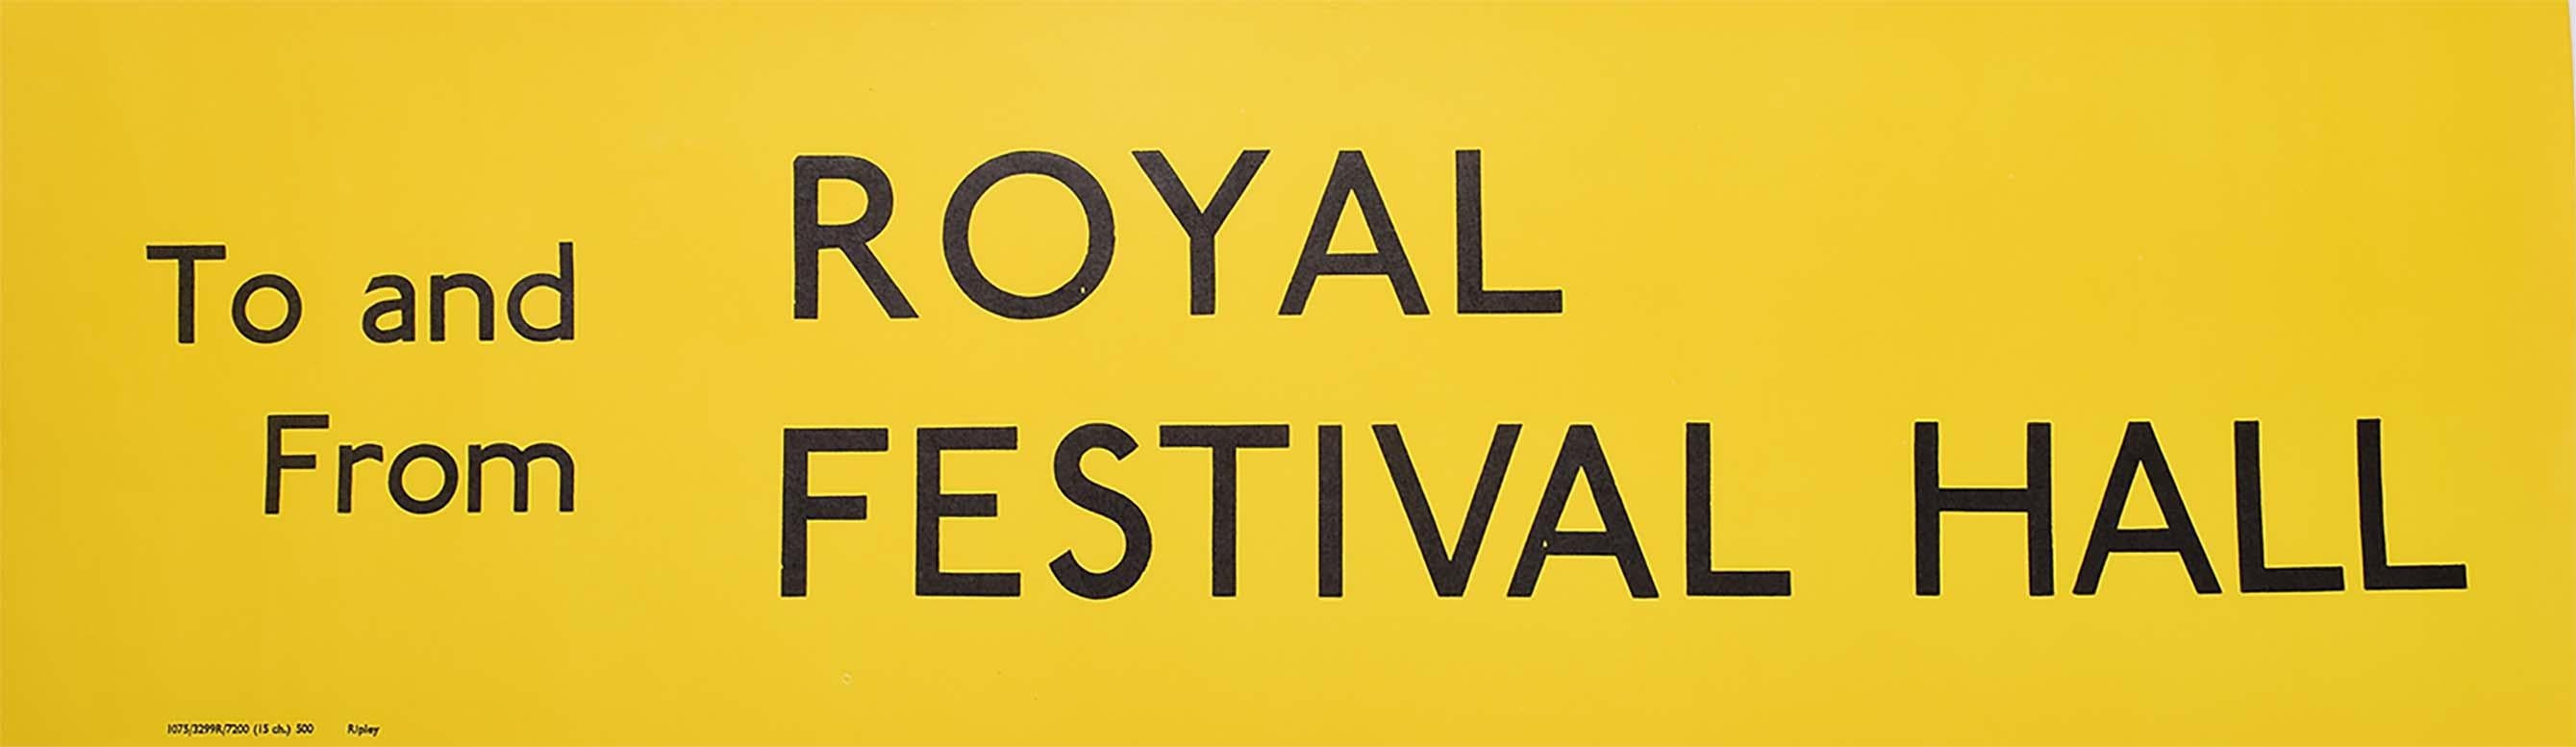 Royal Festival Hall London England Routemaster Bus sign c. 1970